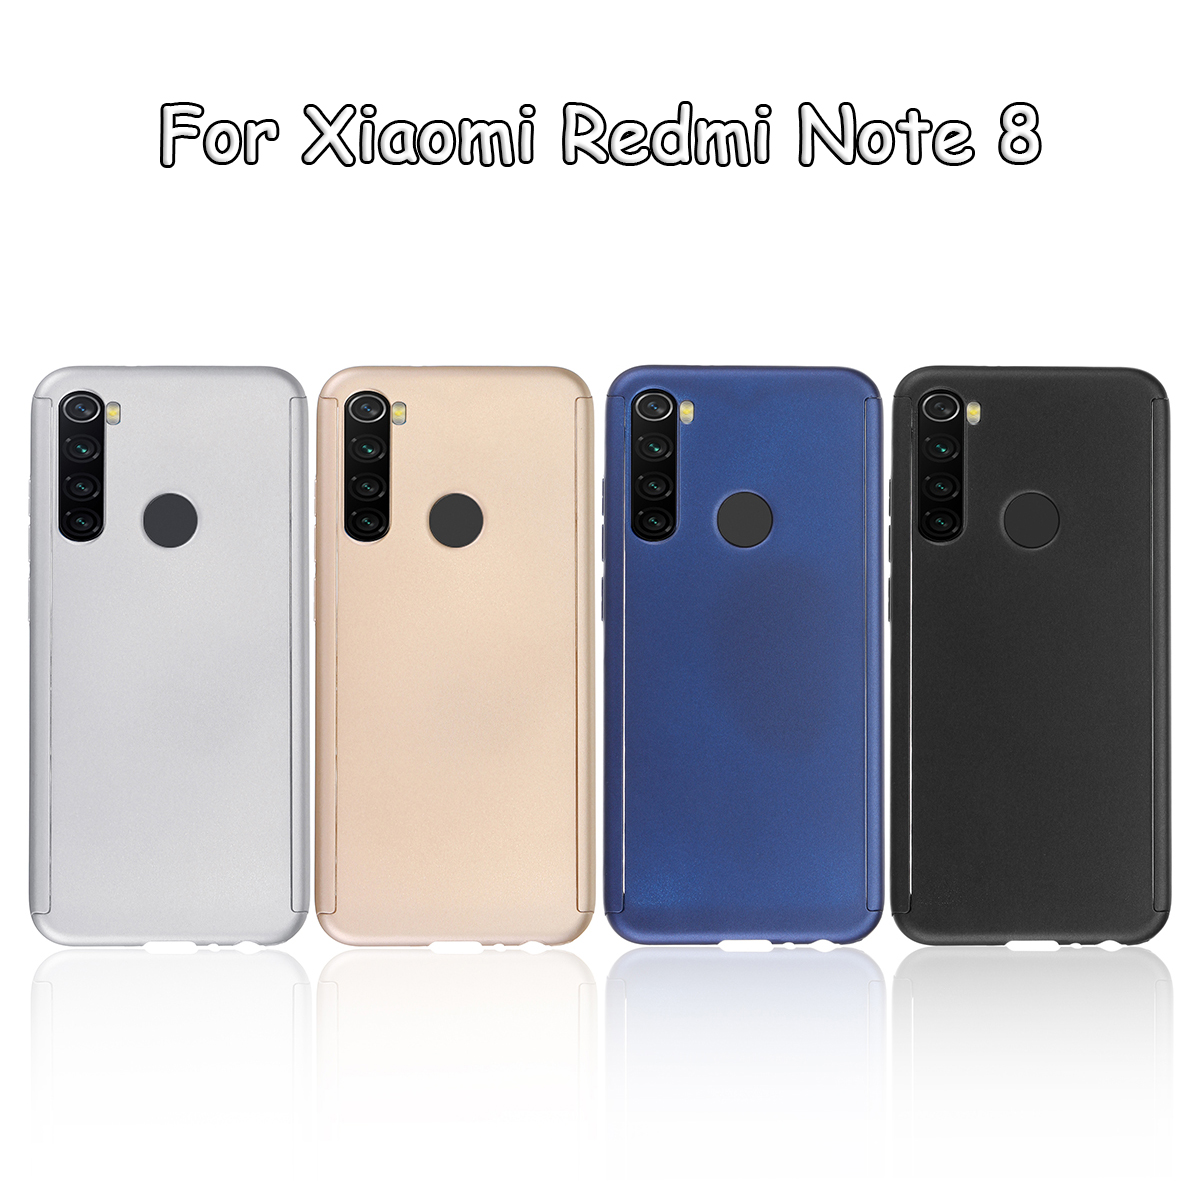 Bakeey 360° Full Cover Frosted Ultra-thin 3 in 1 PC Hard Back Protective Case+Tempered Glass For Xiaomi Redmi Note 8 Non-original